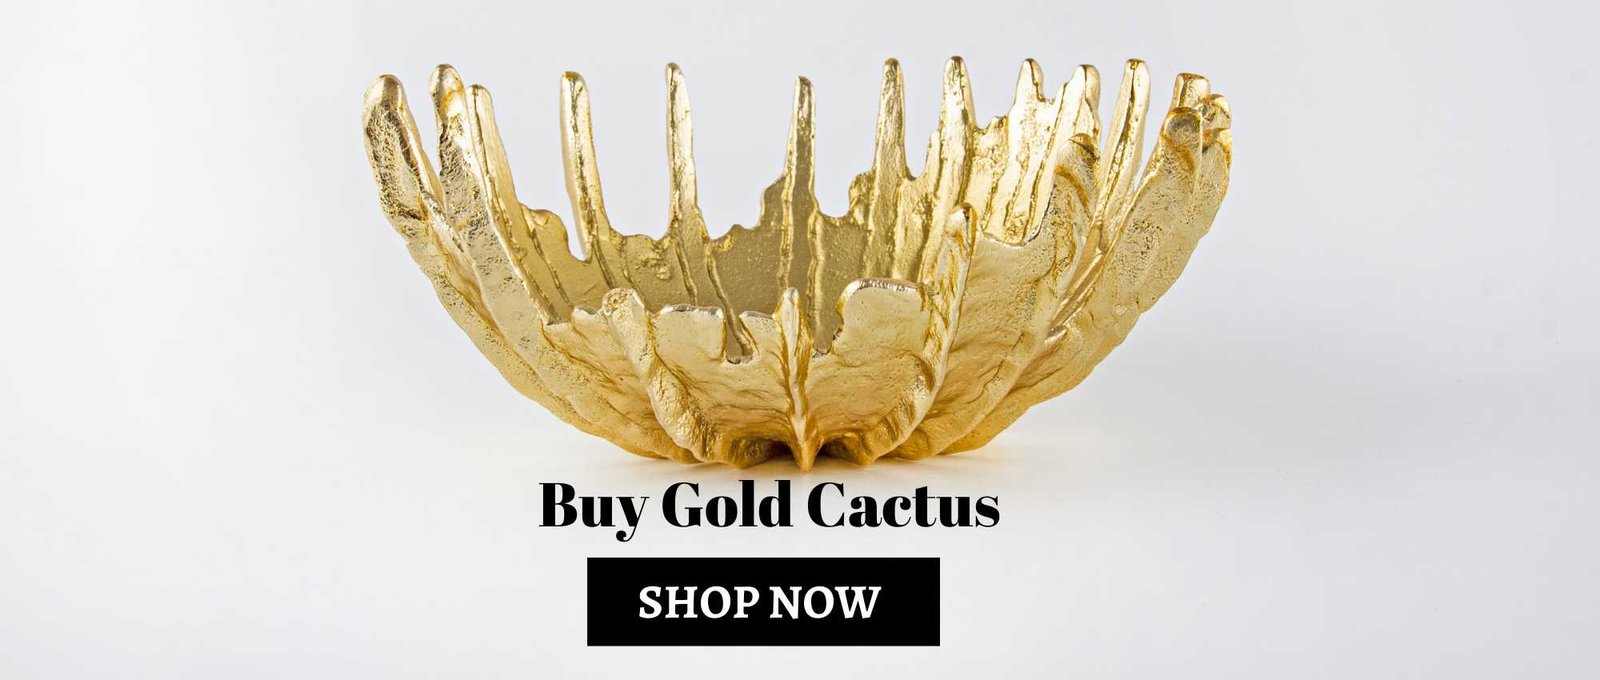 Home Decor Products Online - Vetaas Nature